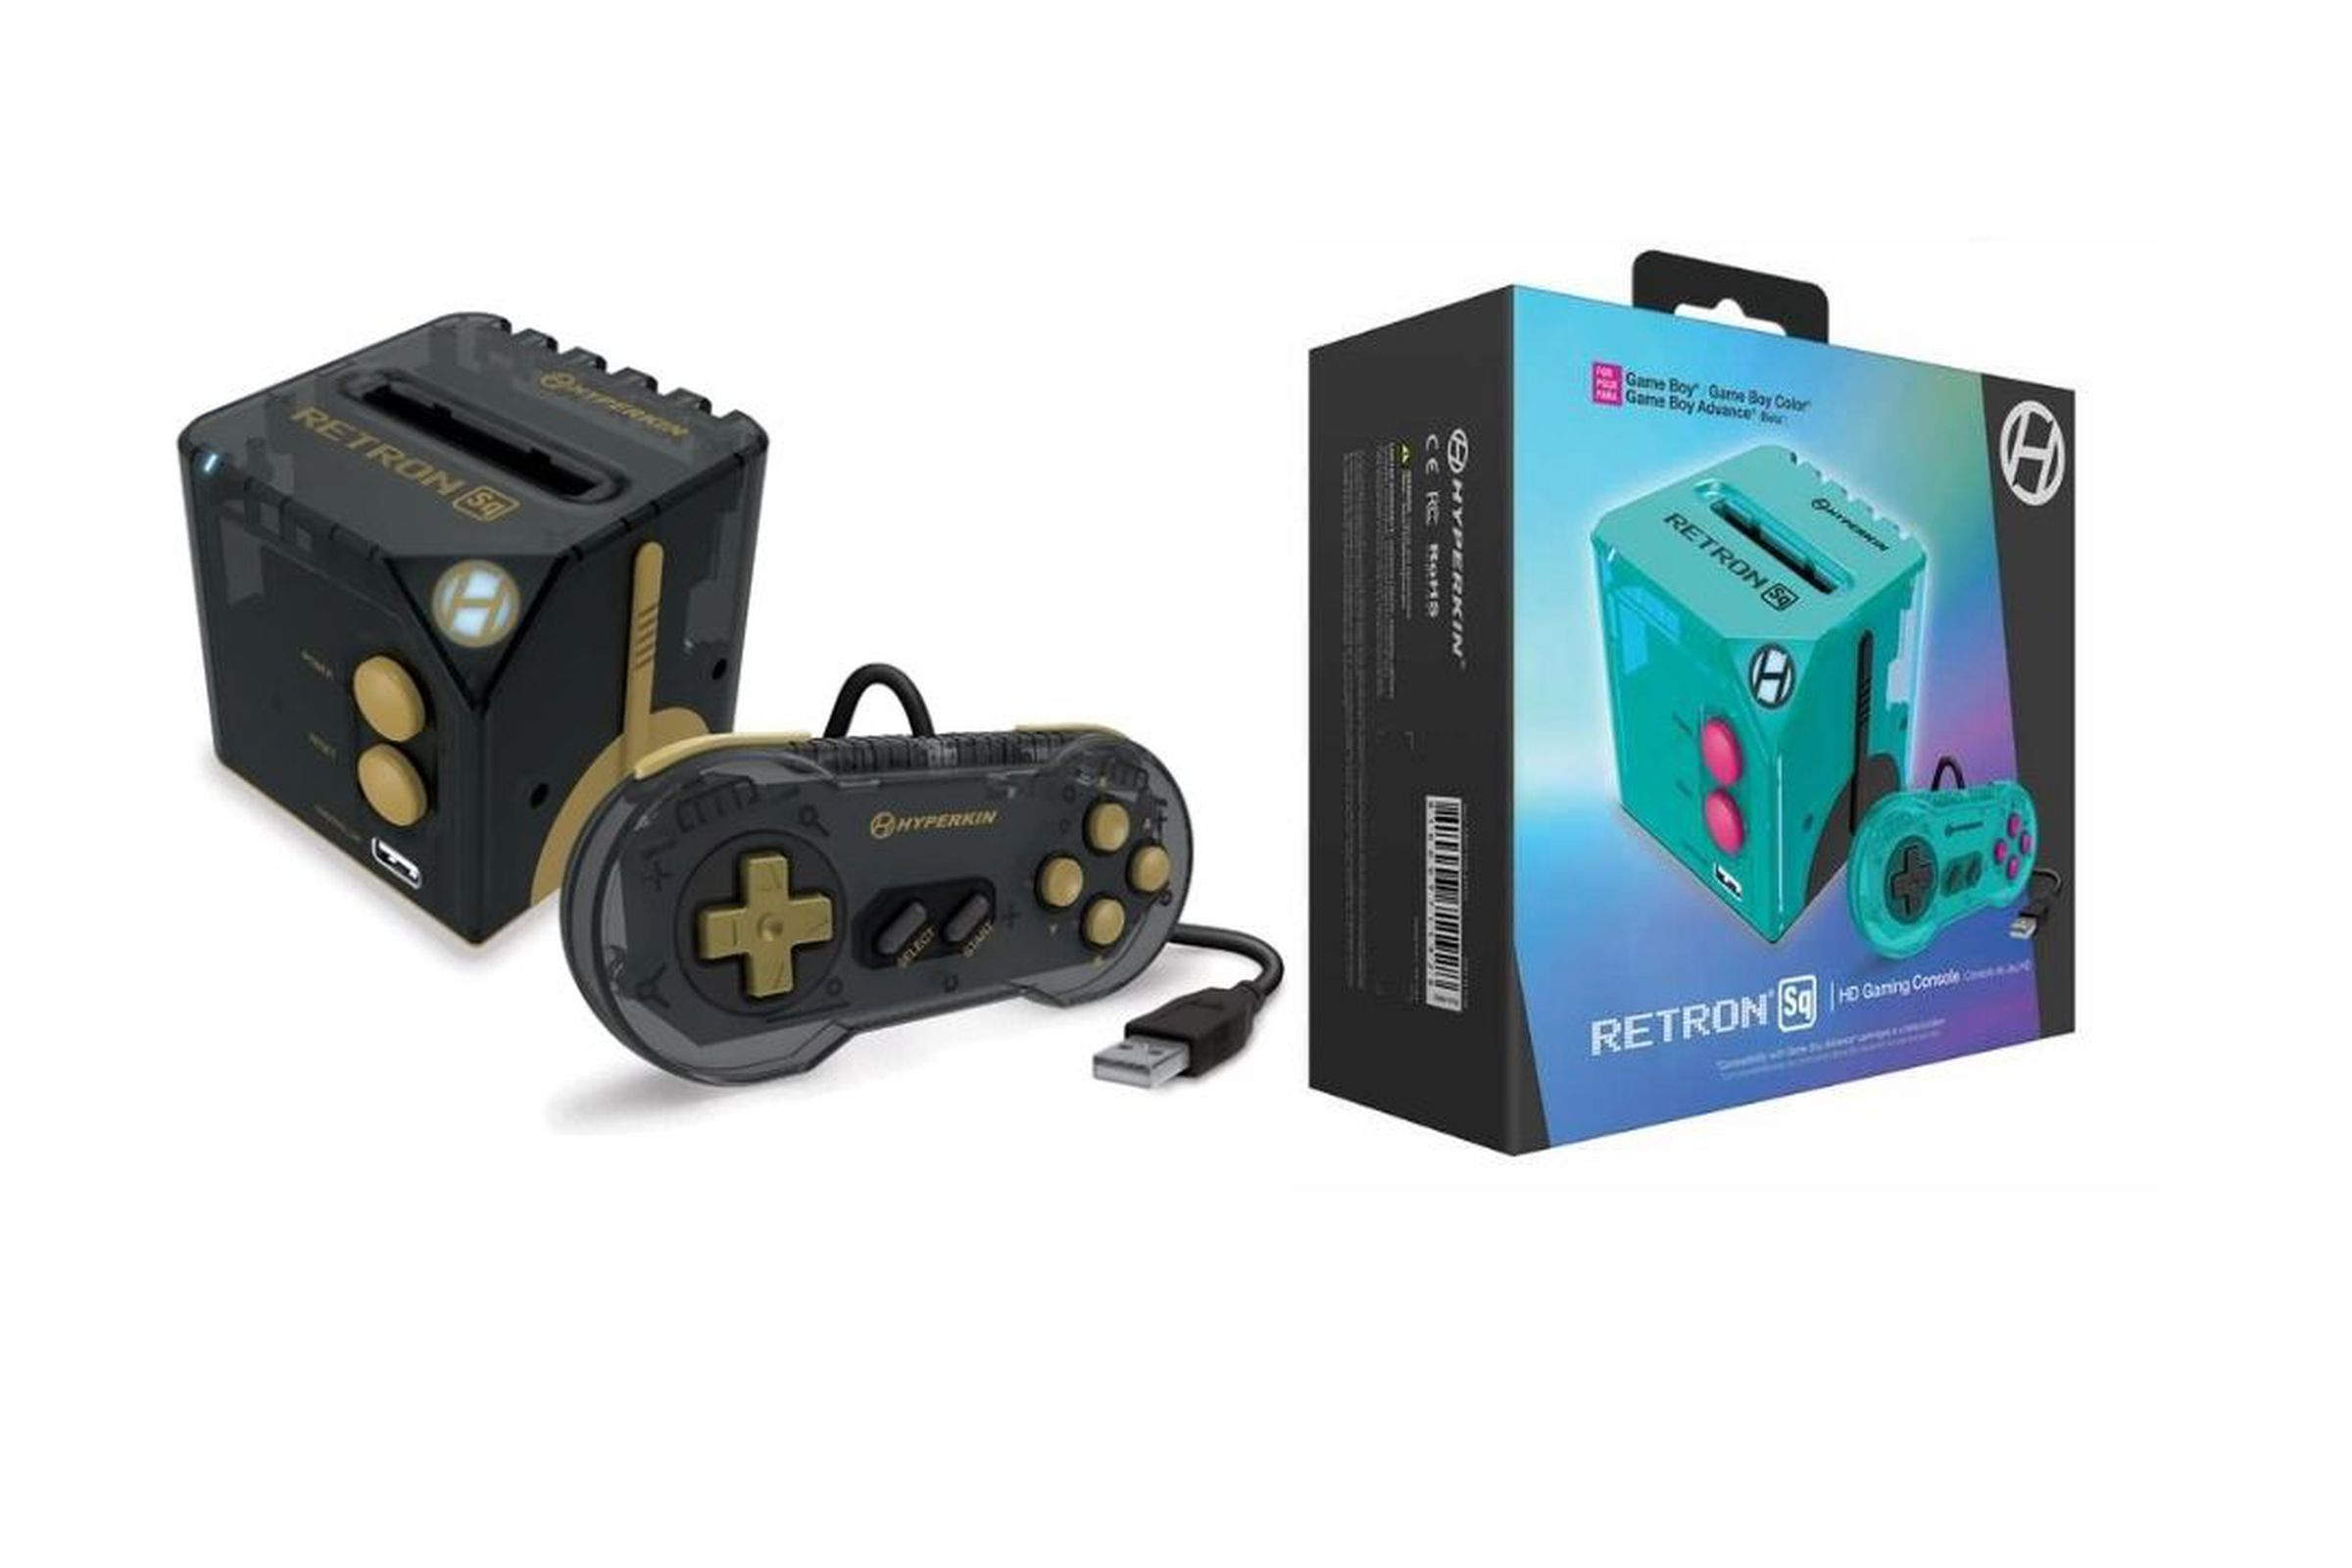 The RetroN Sq comes in two colors: “black gold” and “hyper beach.”